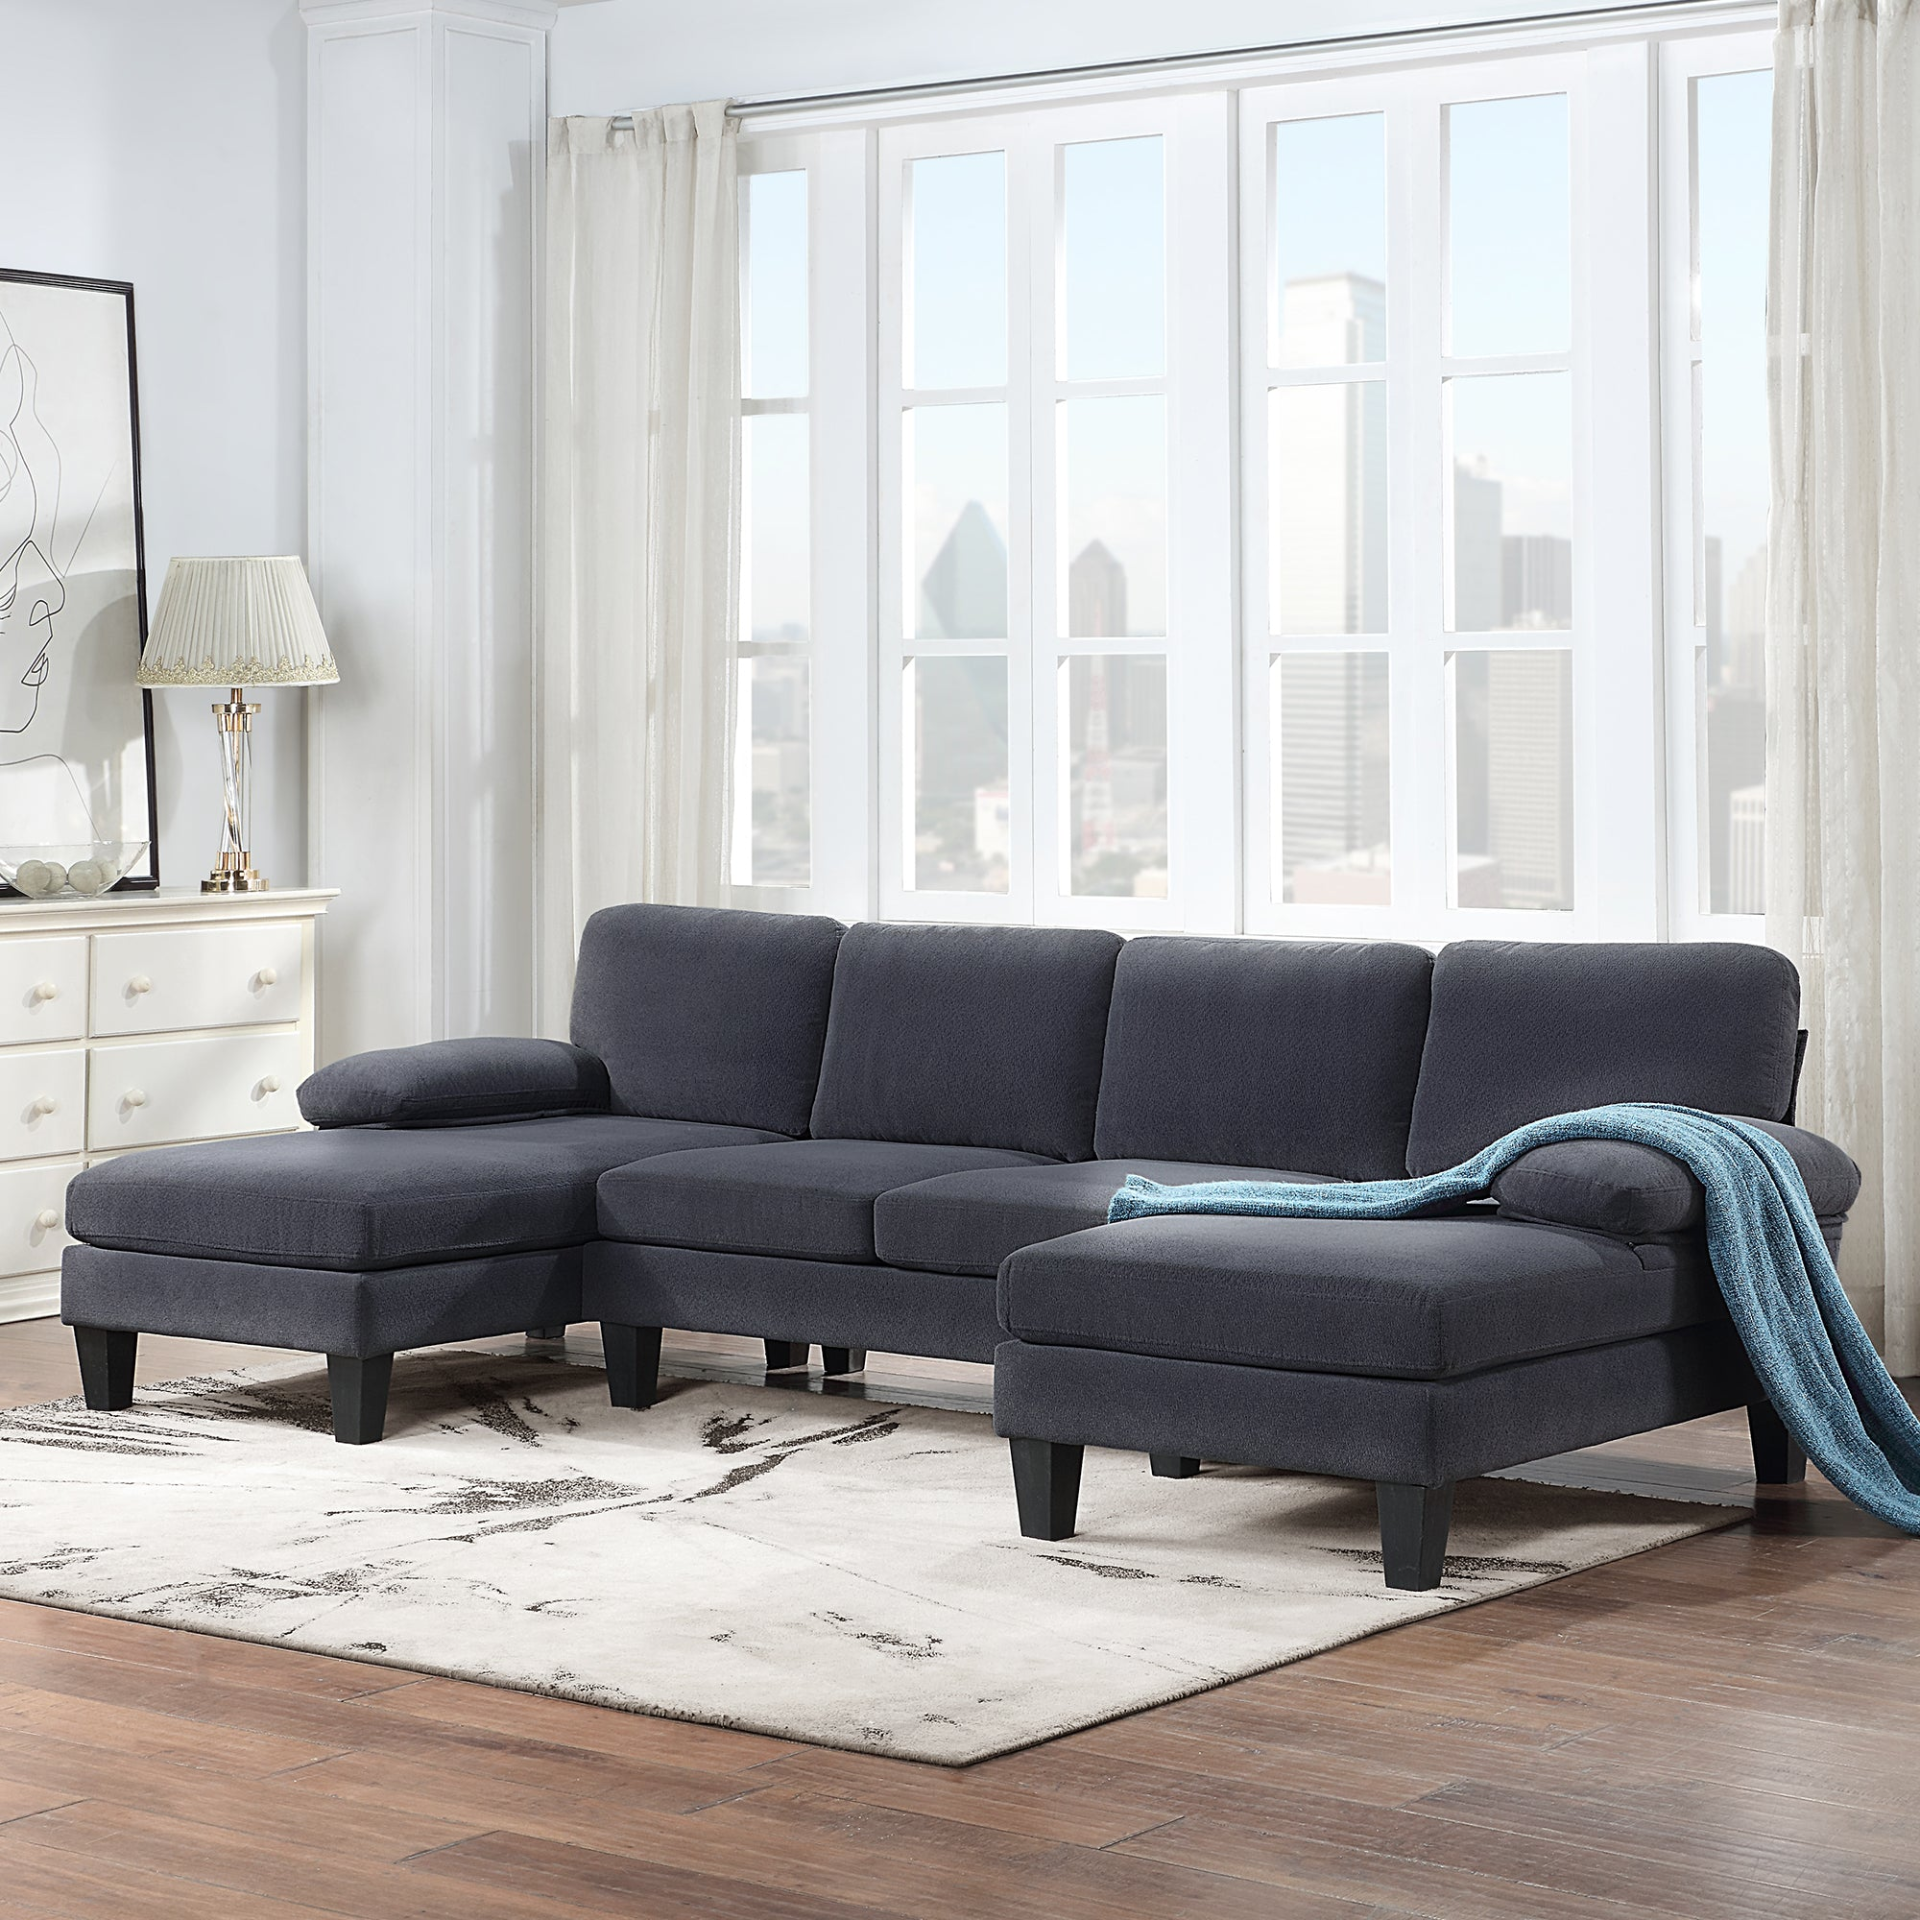 Dark Grey - Luxe Lounge: 6 - Seat U-Shaped Granular Velvet Sofa With Double Chaise (112" x 56")